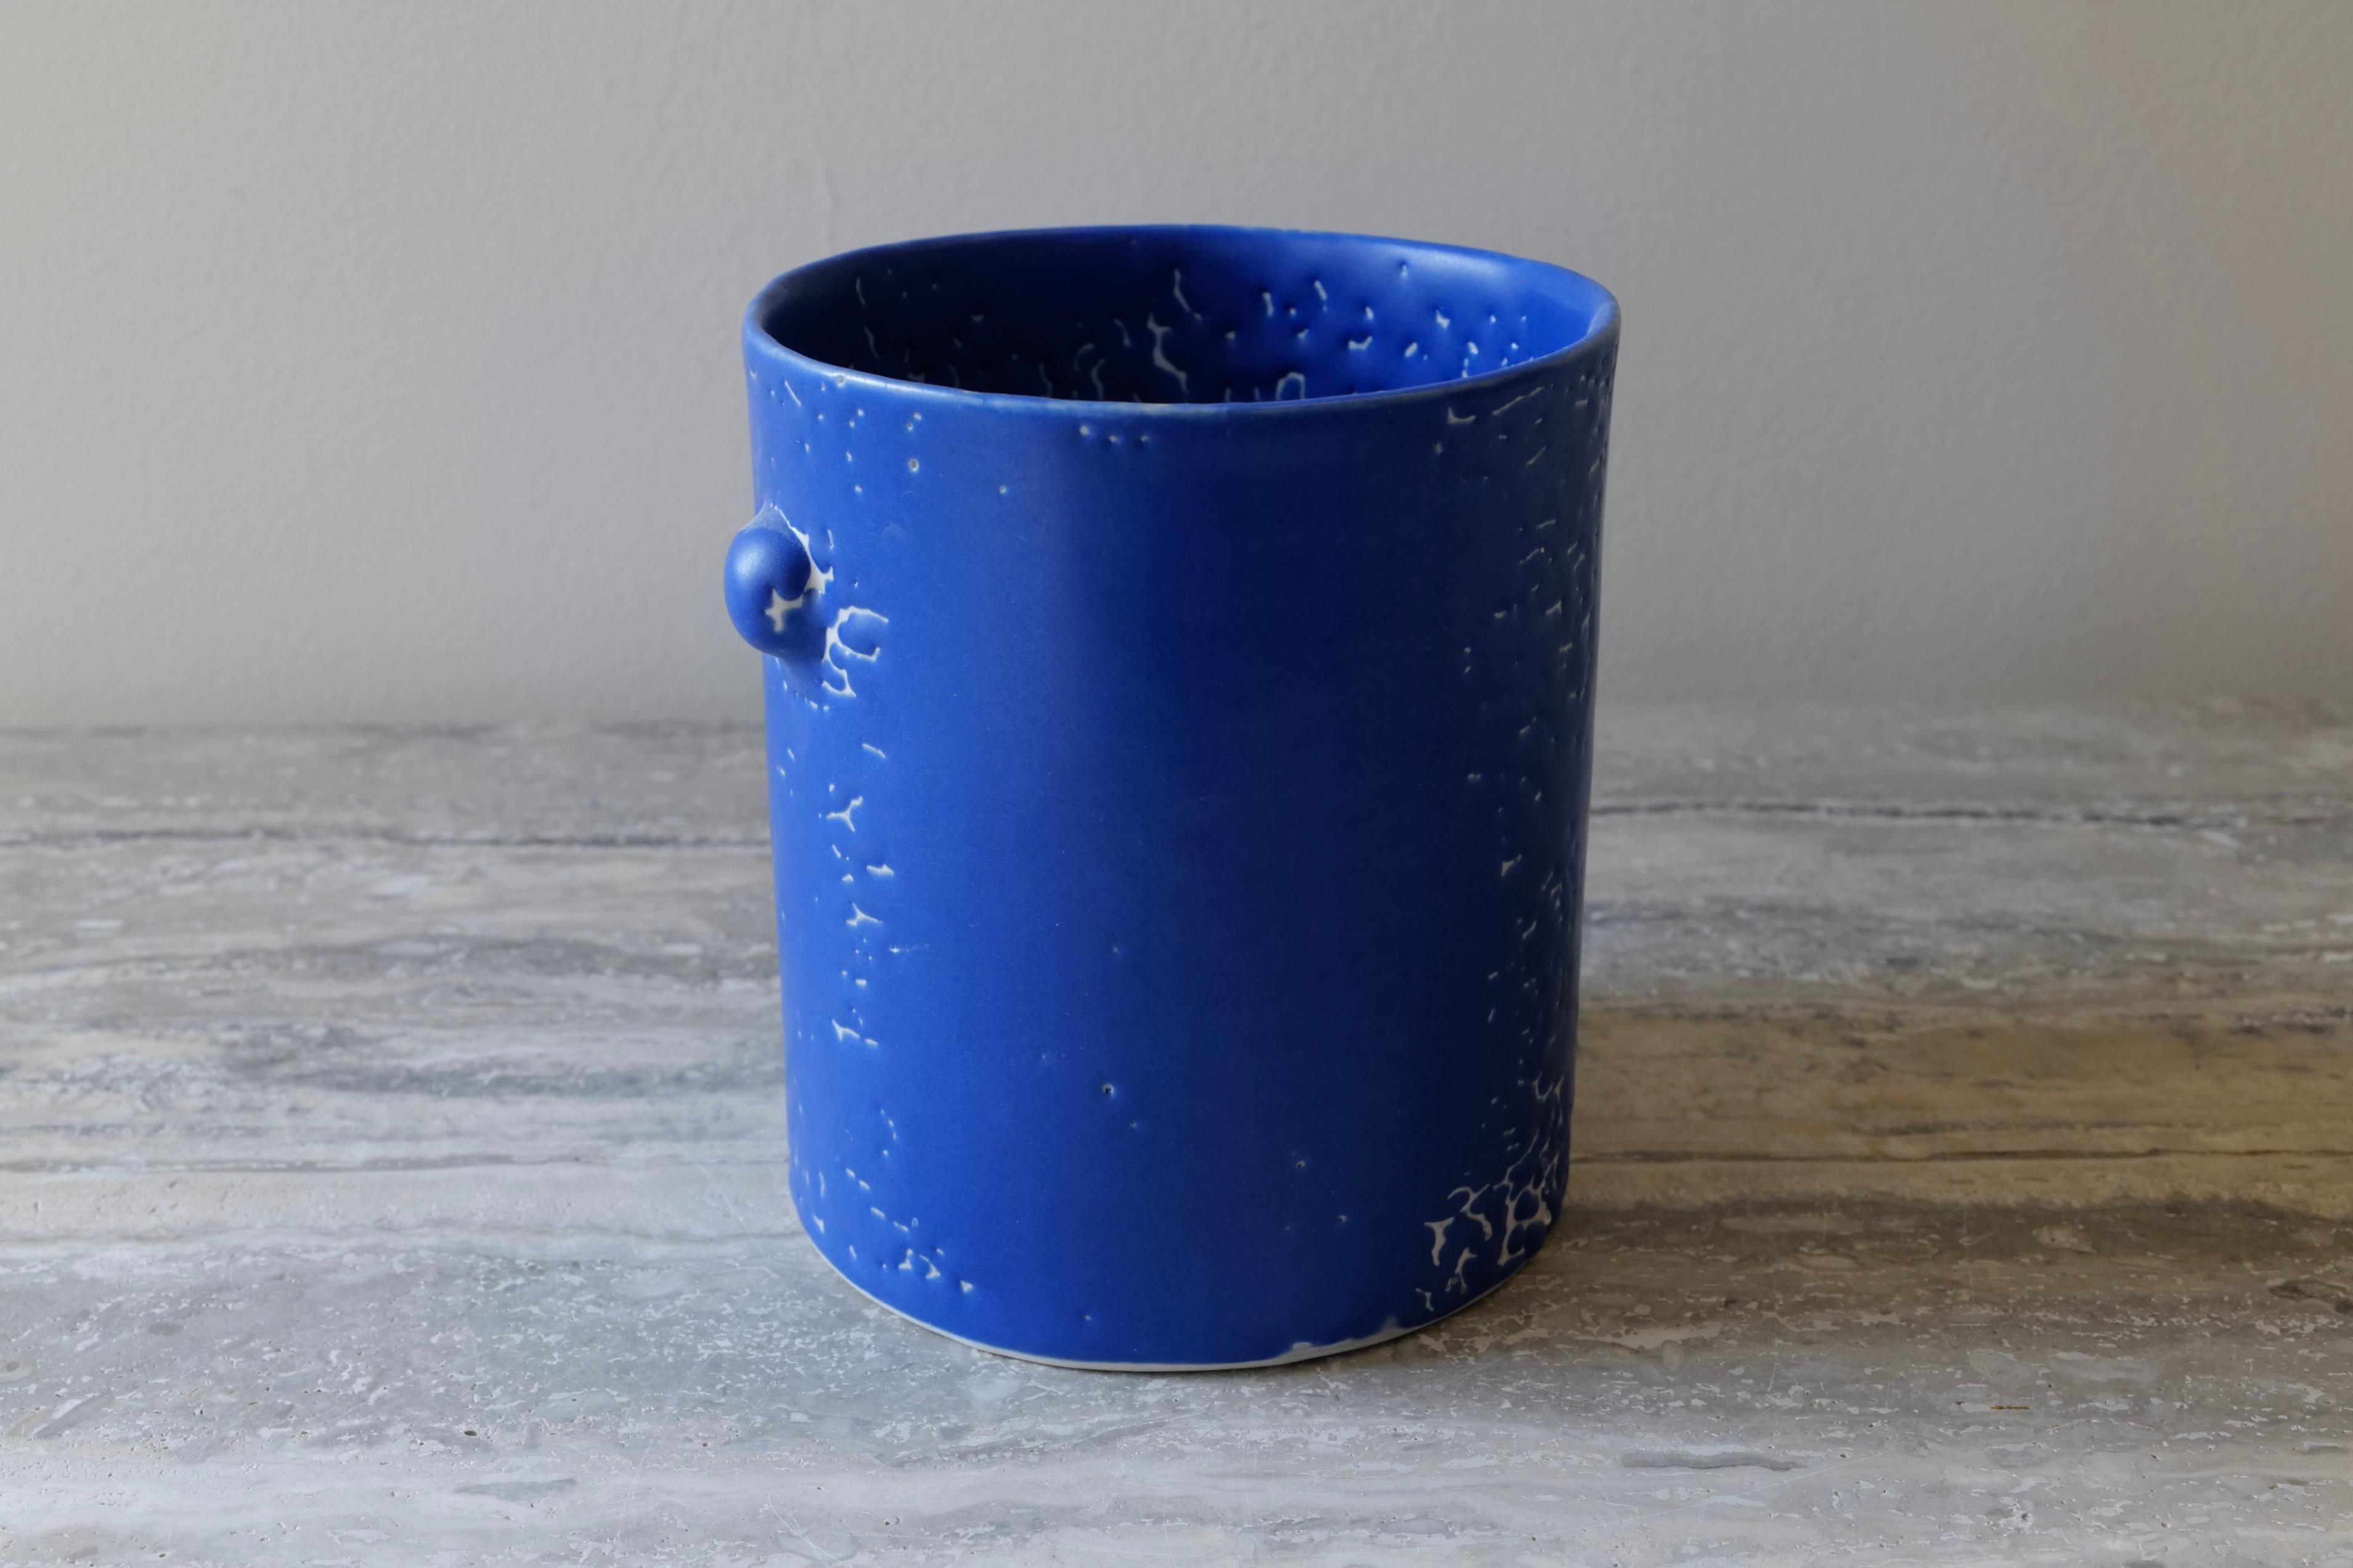 This vase is hand-cast in porcelain and glazed with a rich cobalt glaze that has a beautiful and loose crawl texture across the vessel. The ‘bumps’ motif recalls some classical embellishment with some loose evocation of the Baroque in an abstracted